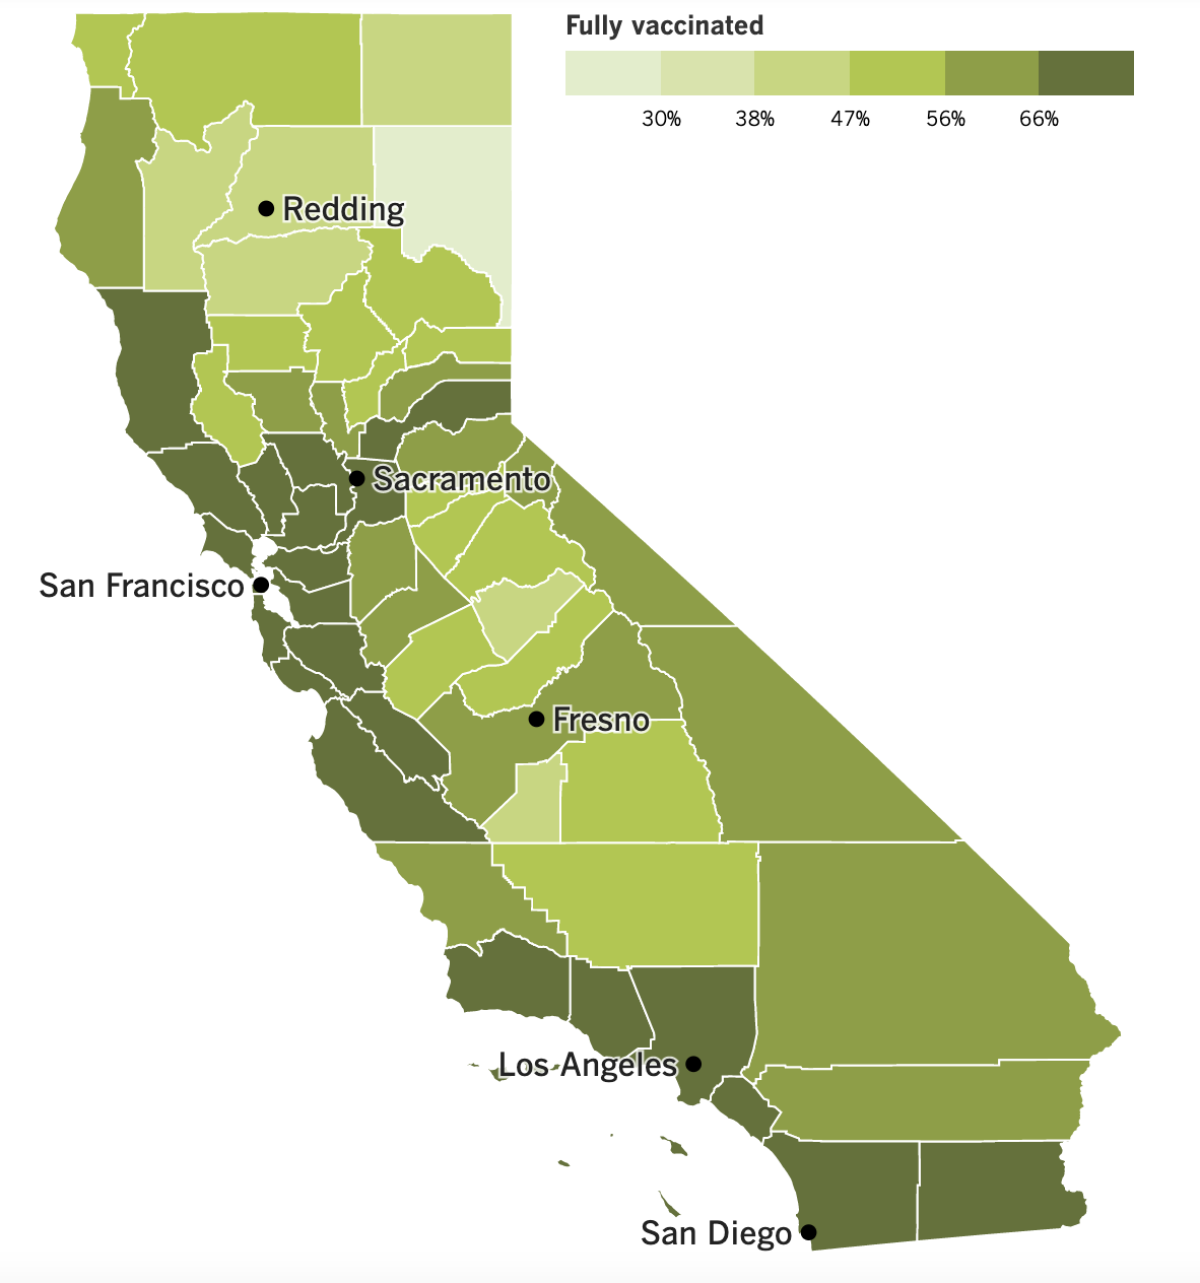 A map showing California's vaccination progress as of March 4, 2022.